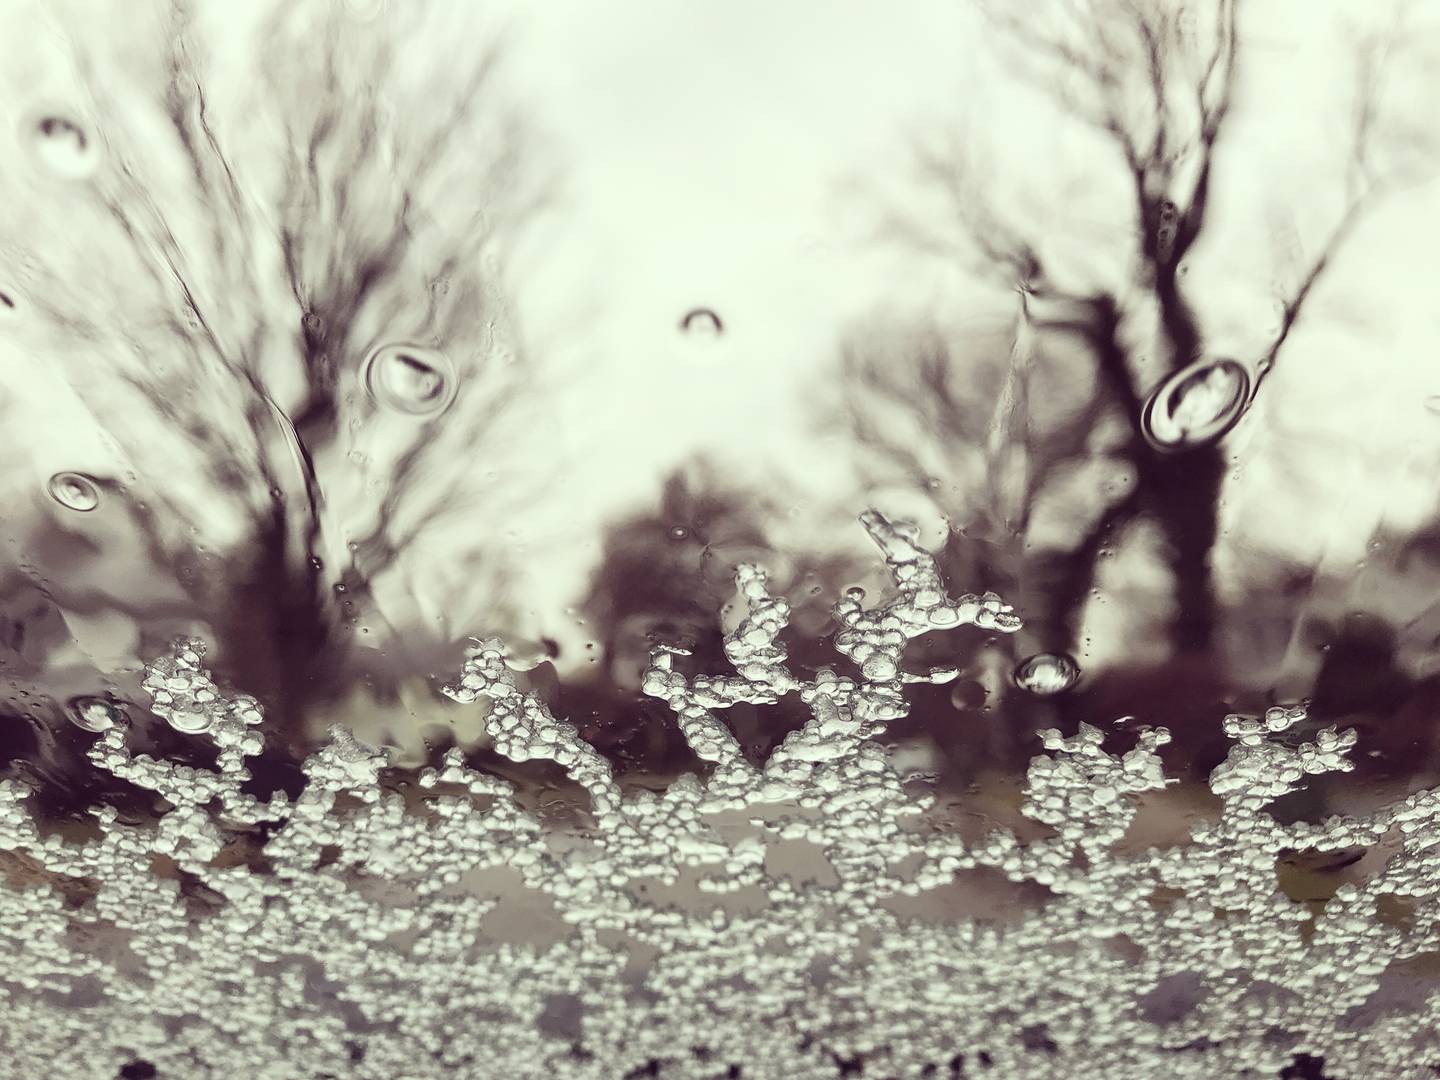 Close up of ice and rain on the windshield of a car with bare winter trees beyond.